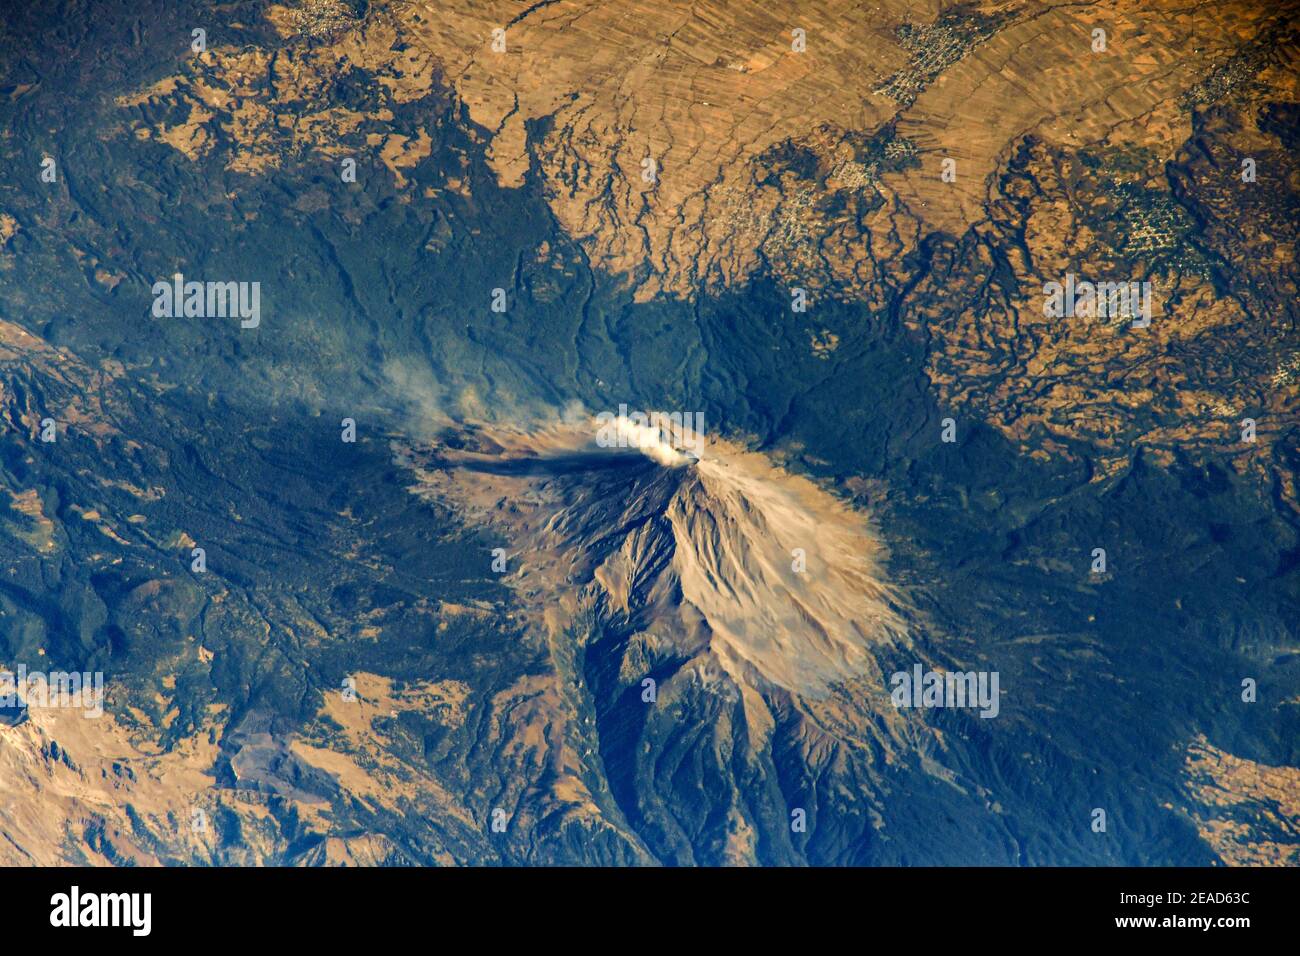 MEXICO - 25 January 2021 - The active volcano of Popocatépetl is pictured from the International Space Station as it orbited 261 miles above central M Stock Photo